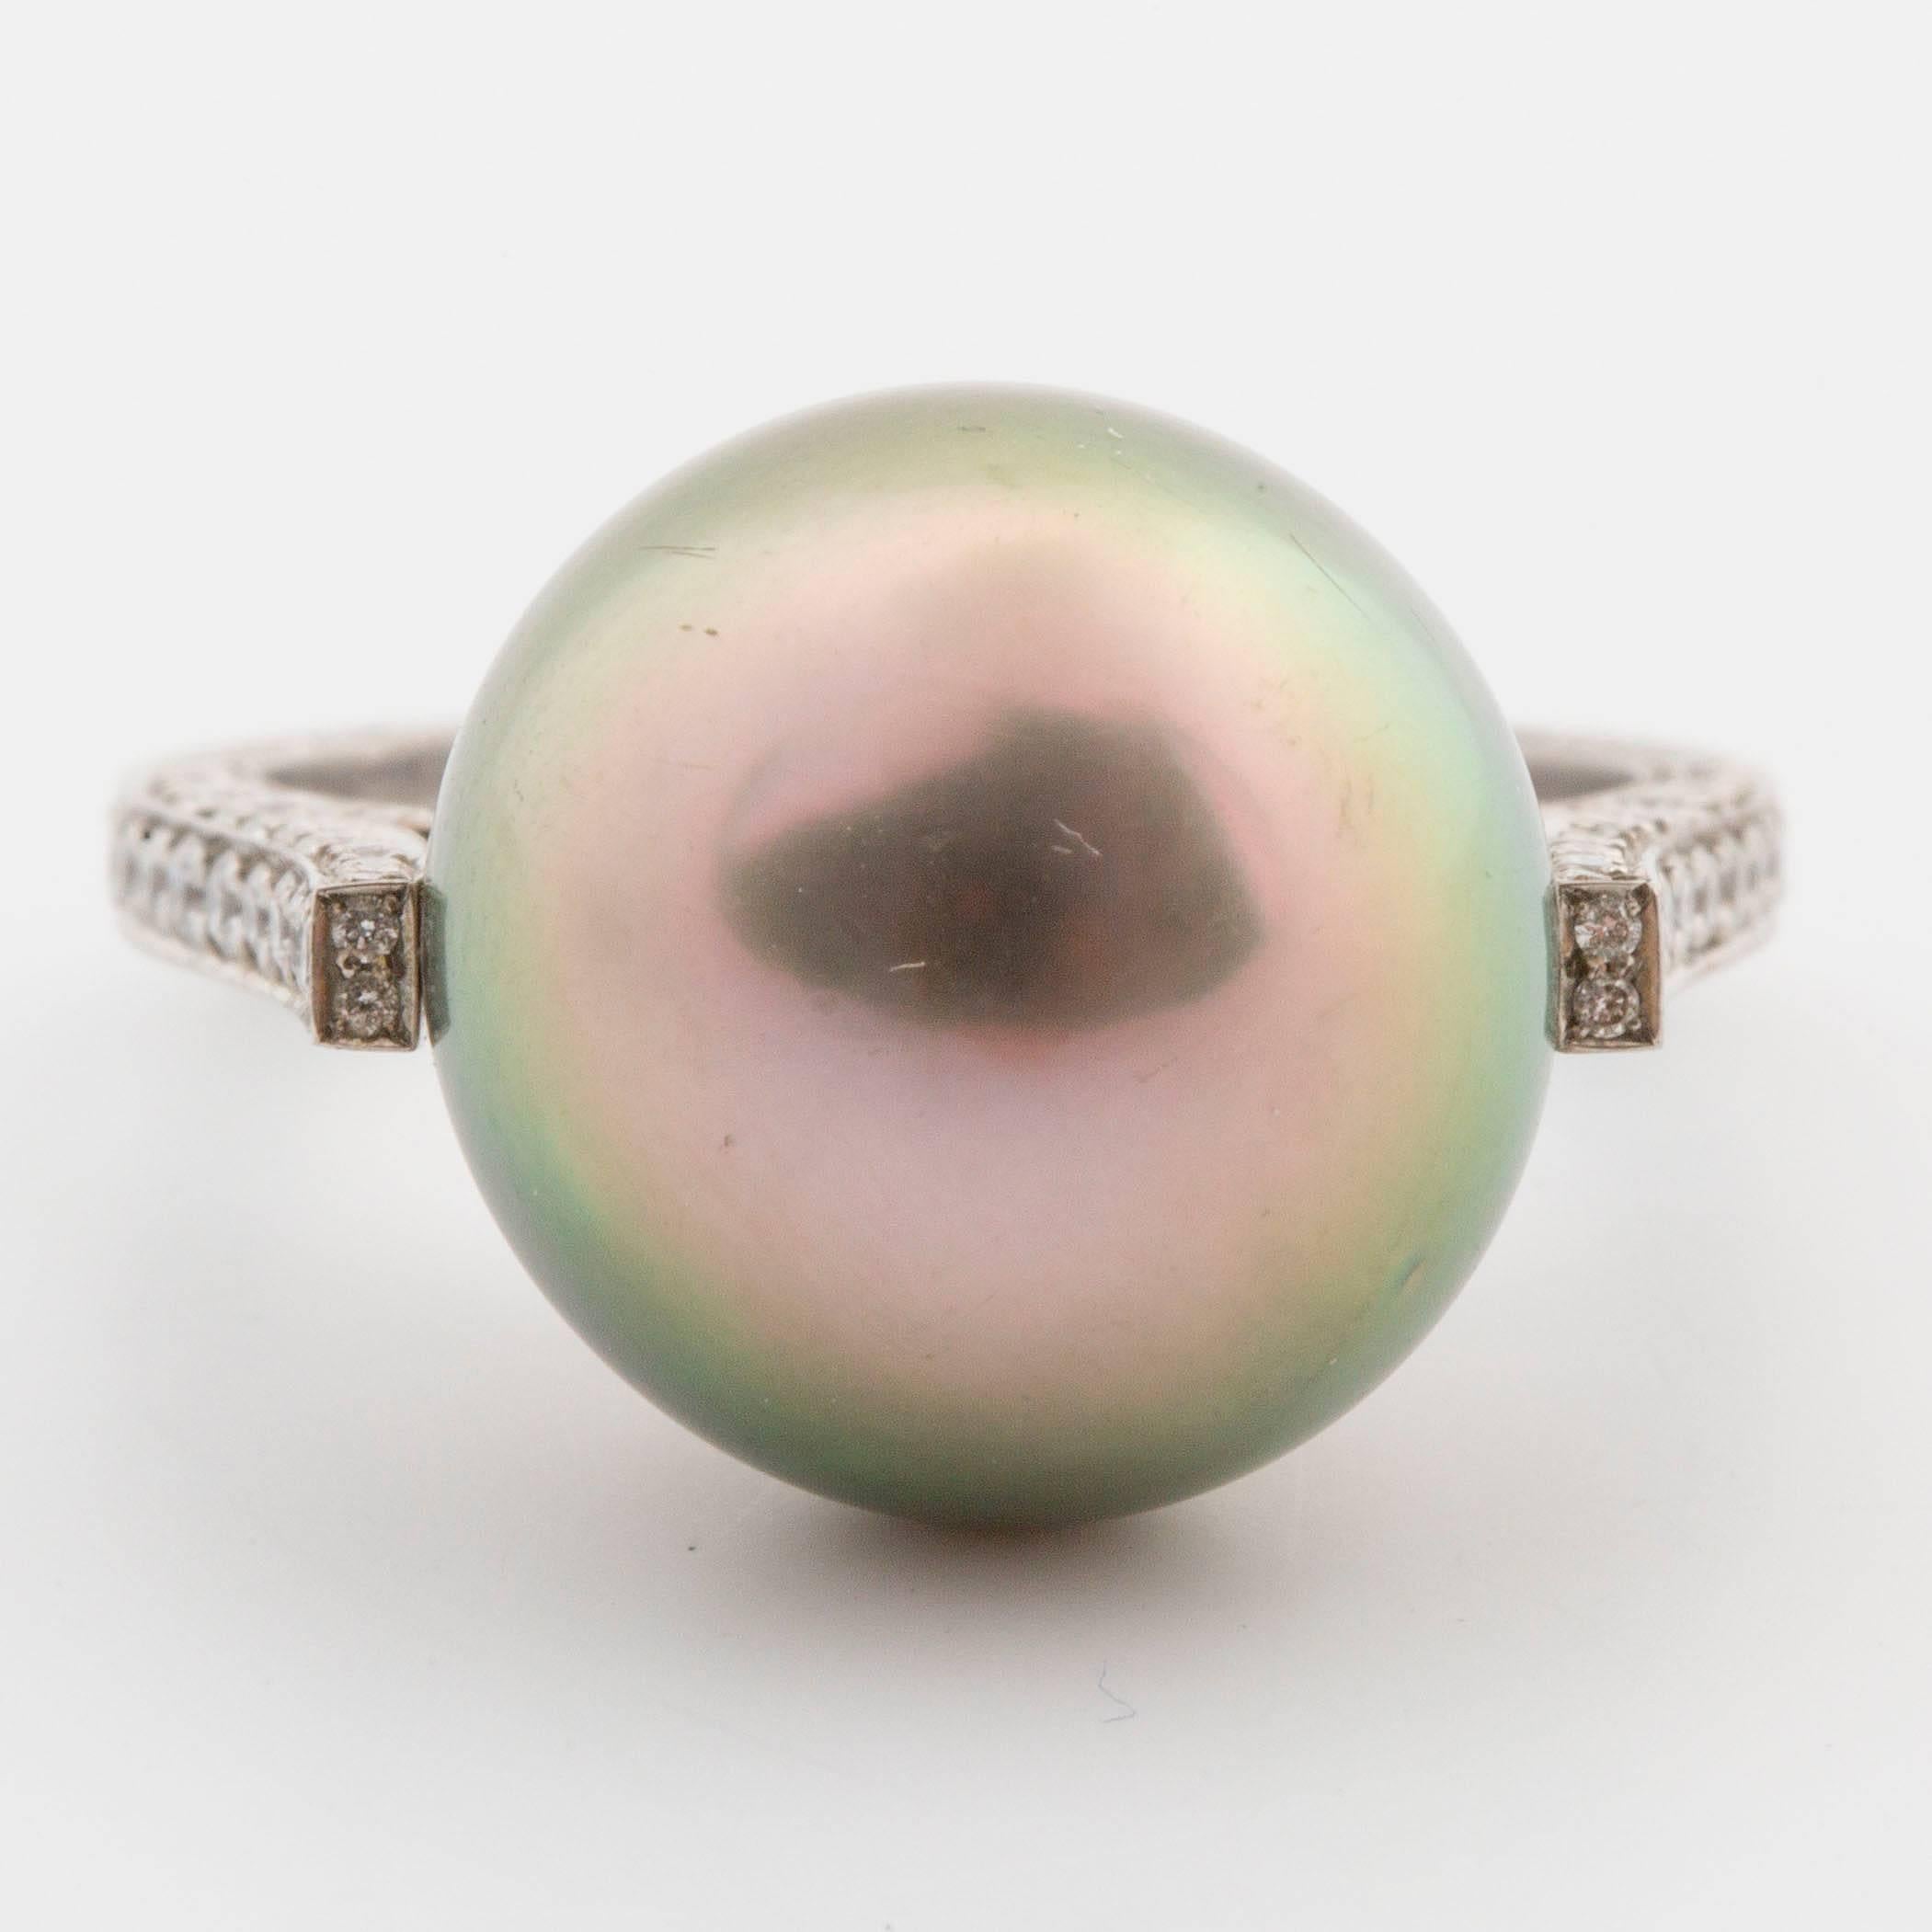 Beautiful and mesmerizing ring with a tahitian pearl on the crown and diamonds with approximately 1.20 ct. The ring is in very good condition with minimal signs of wear. The peal measures 16mm and the ring size is 54.